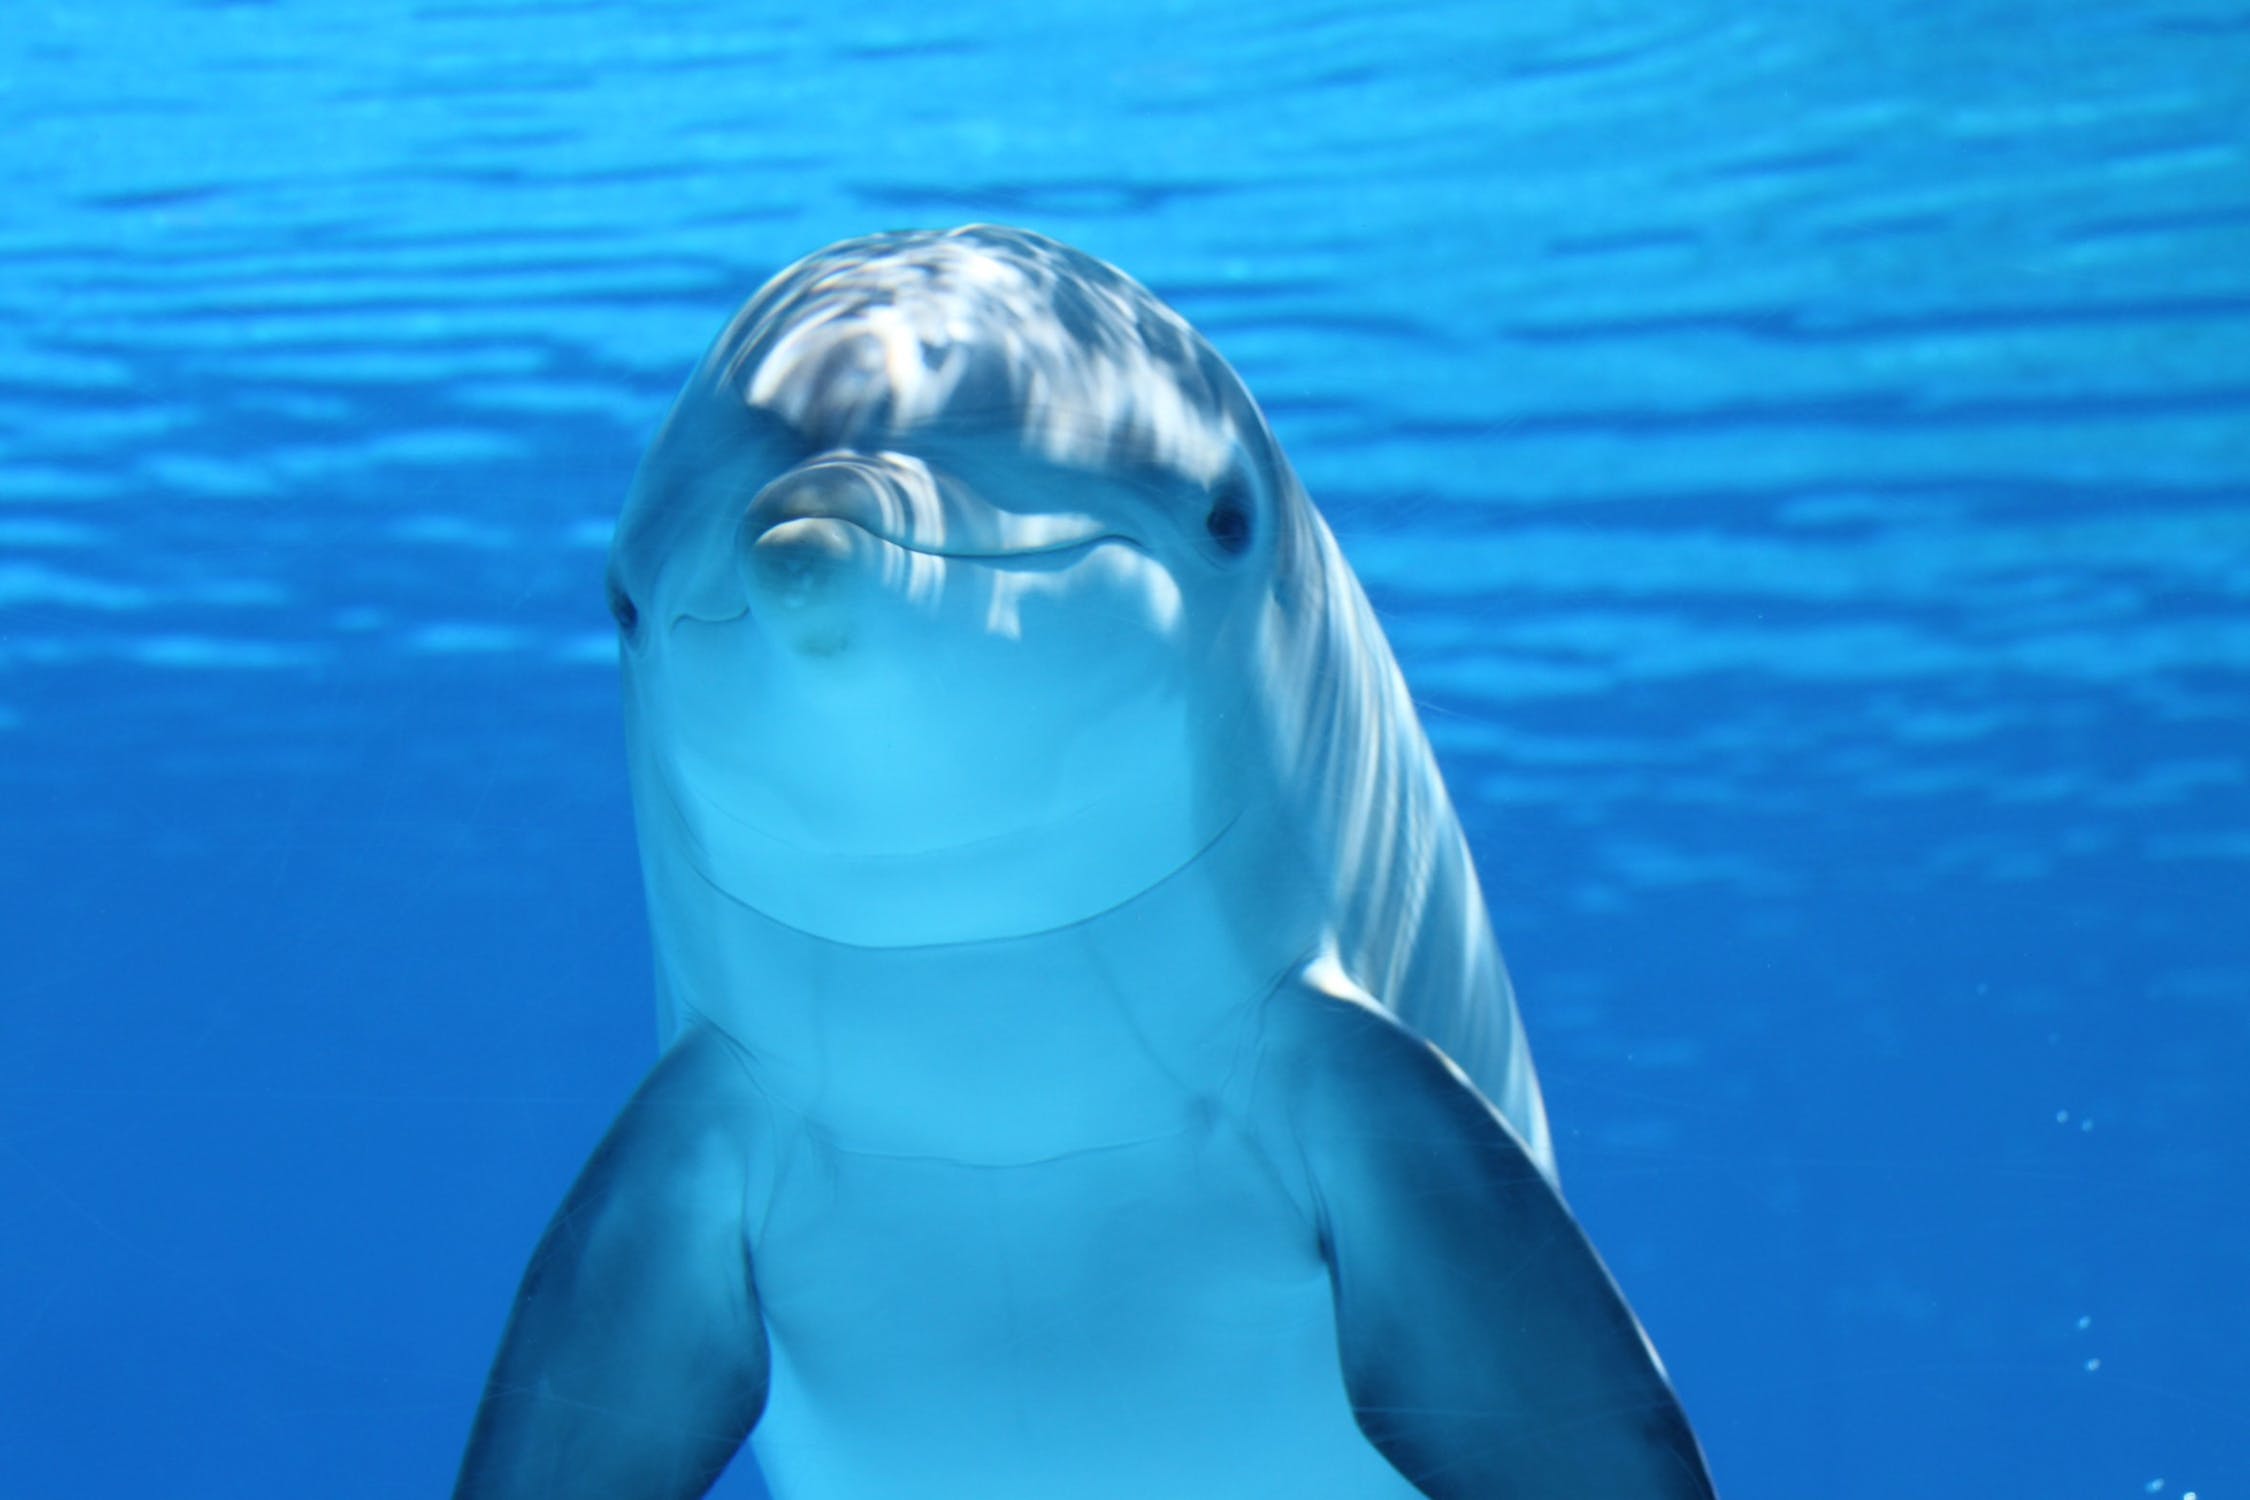 A white and gray dolphin in blue water.